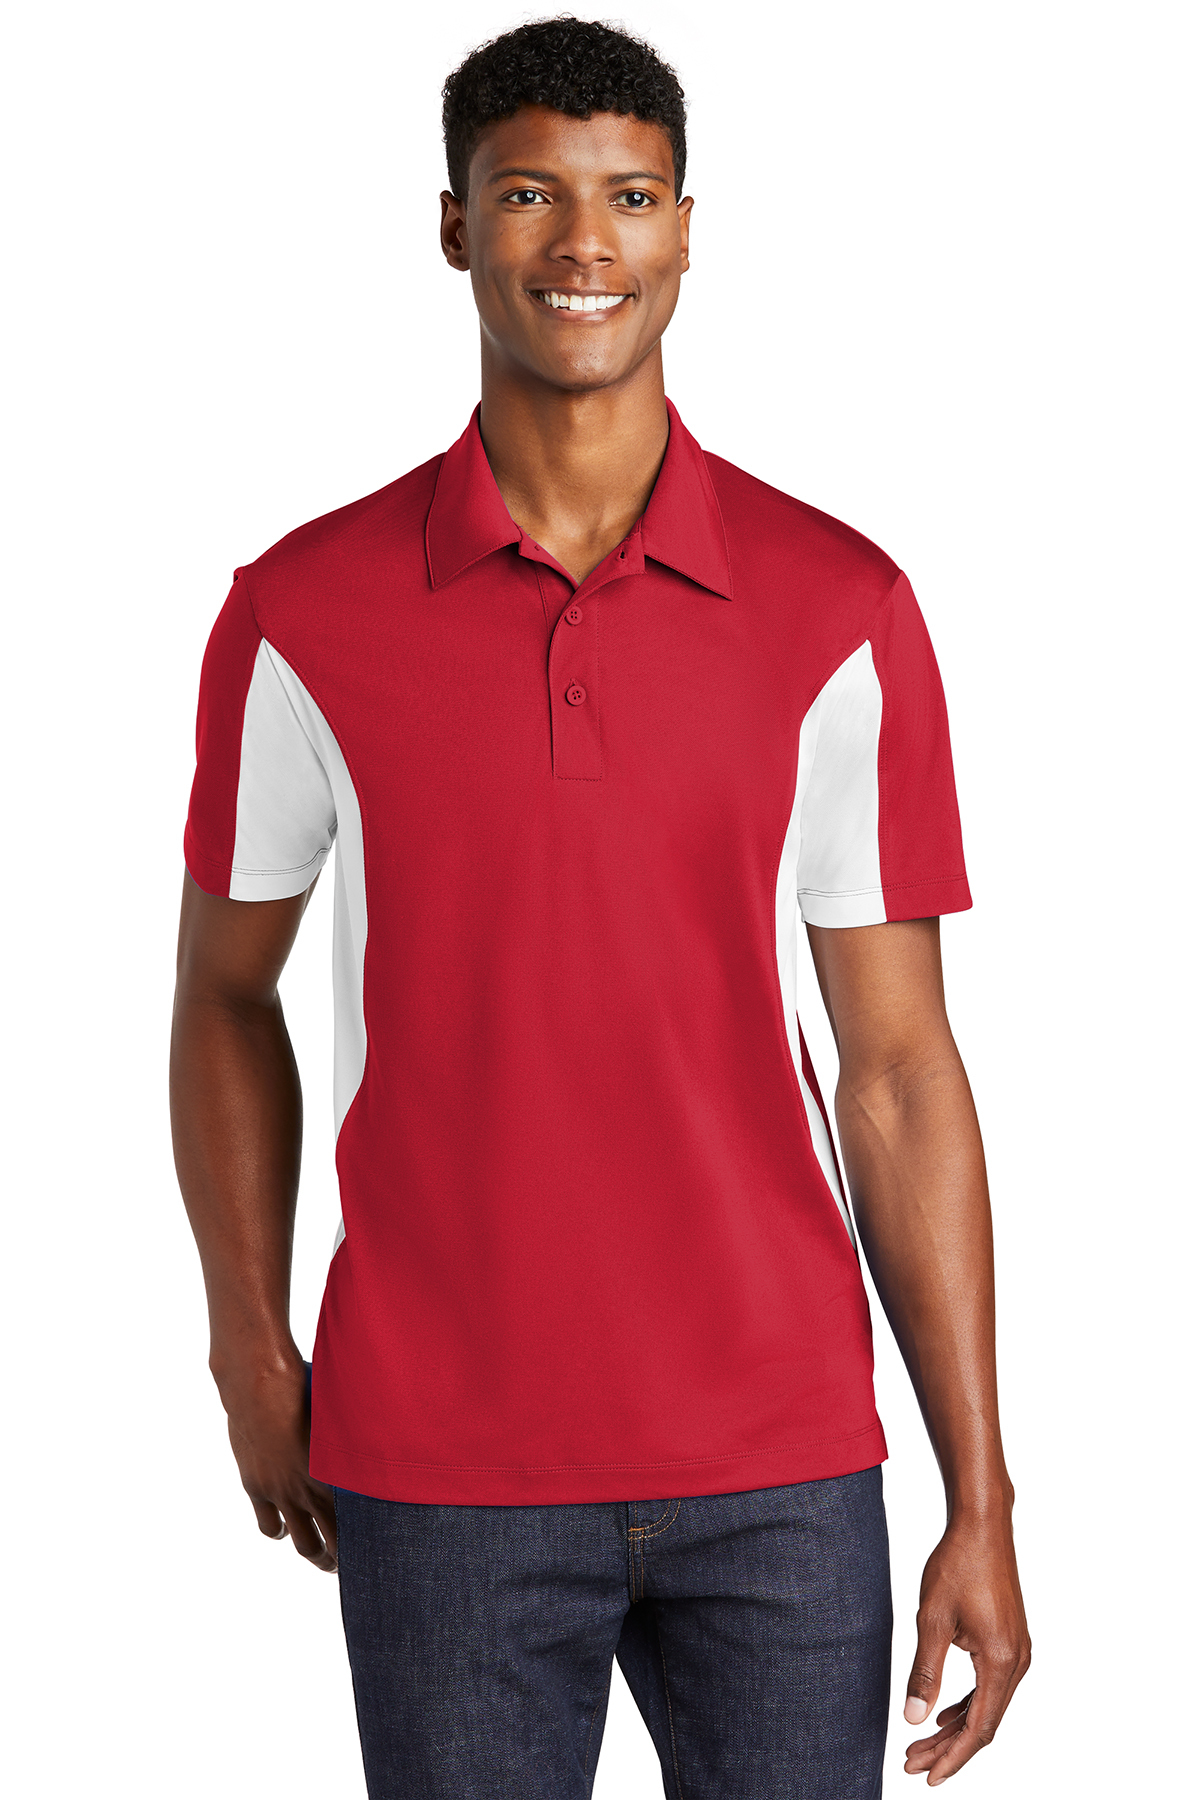 Promotional Side Blocked Micropique Sport-Wick Polo - Men's $29.98